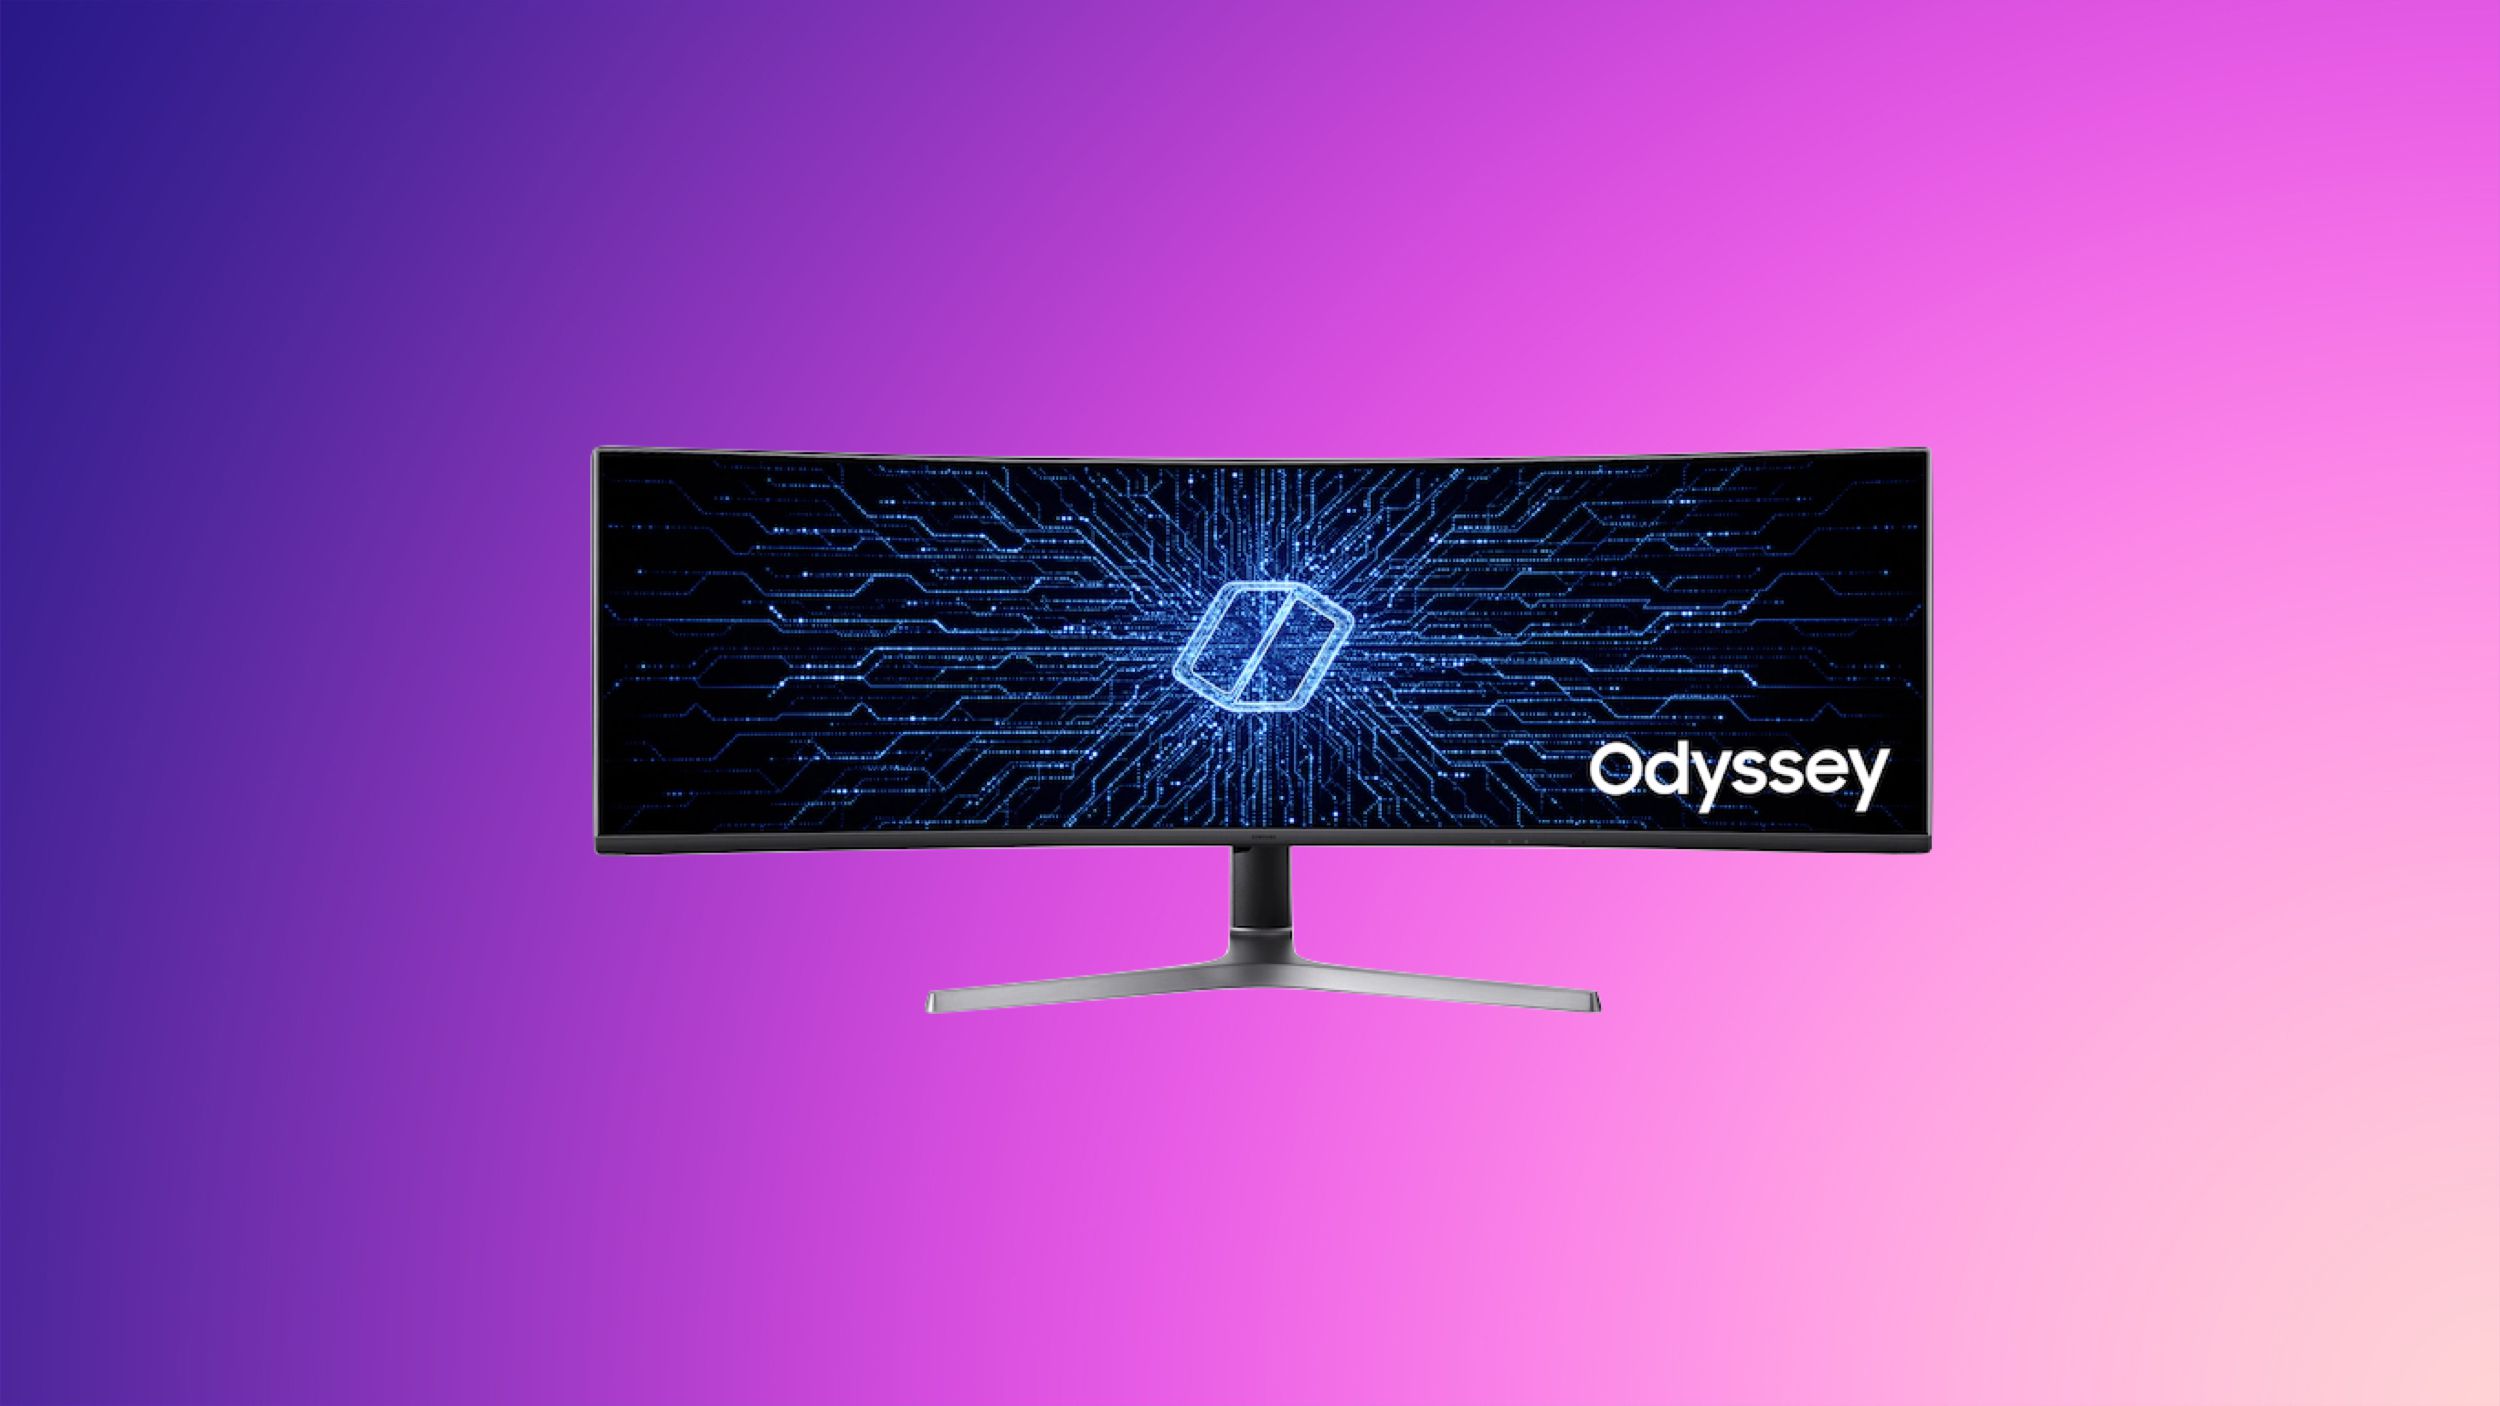 Deals: Samsung Taking Up to $600 off Select Monitors in New Sale - macrumors.com